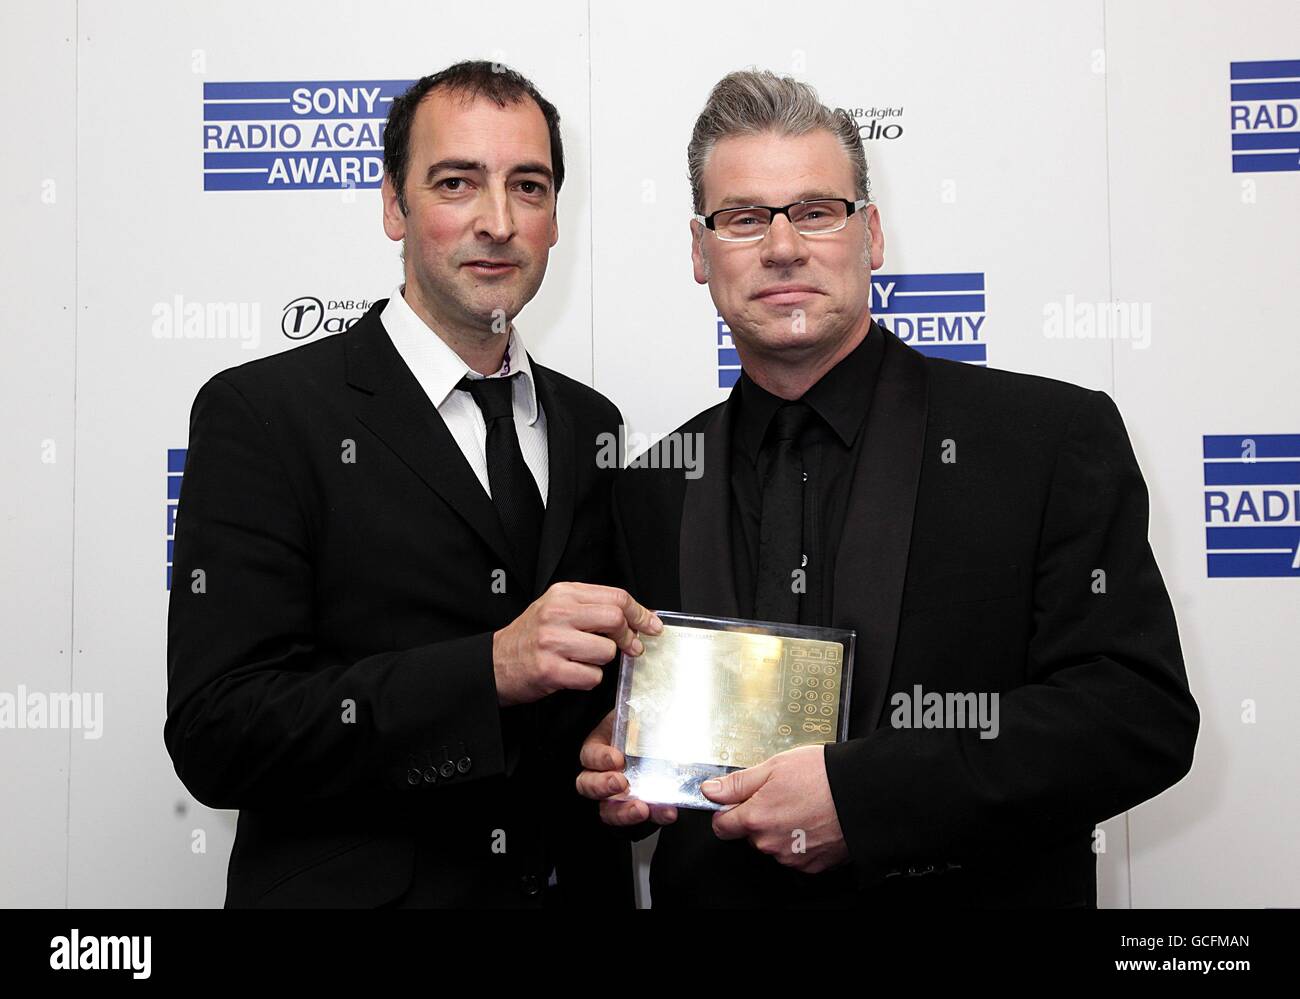 Mark Kermode (right) collects the Best Specialist Contributor award from Alistair McGowan at the Sony Radio Academy Awards 2010 at the Grosvenor House Hotel, London Stock Photo